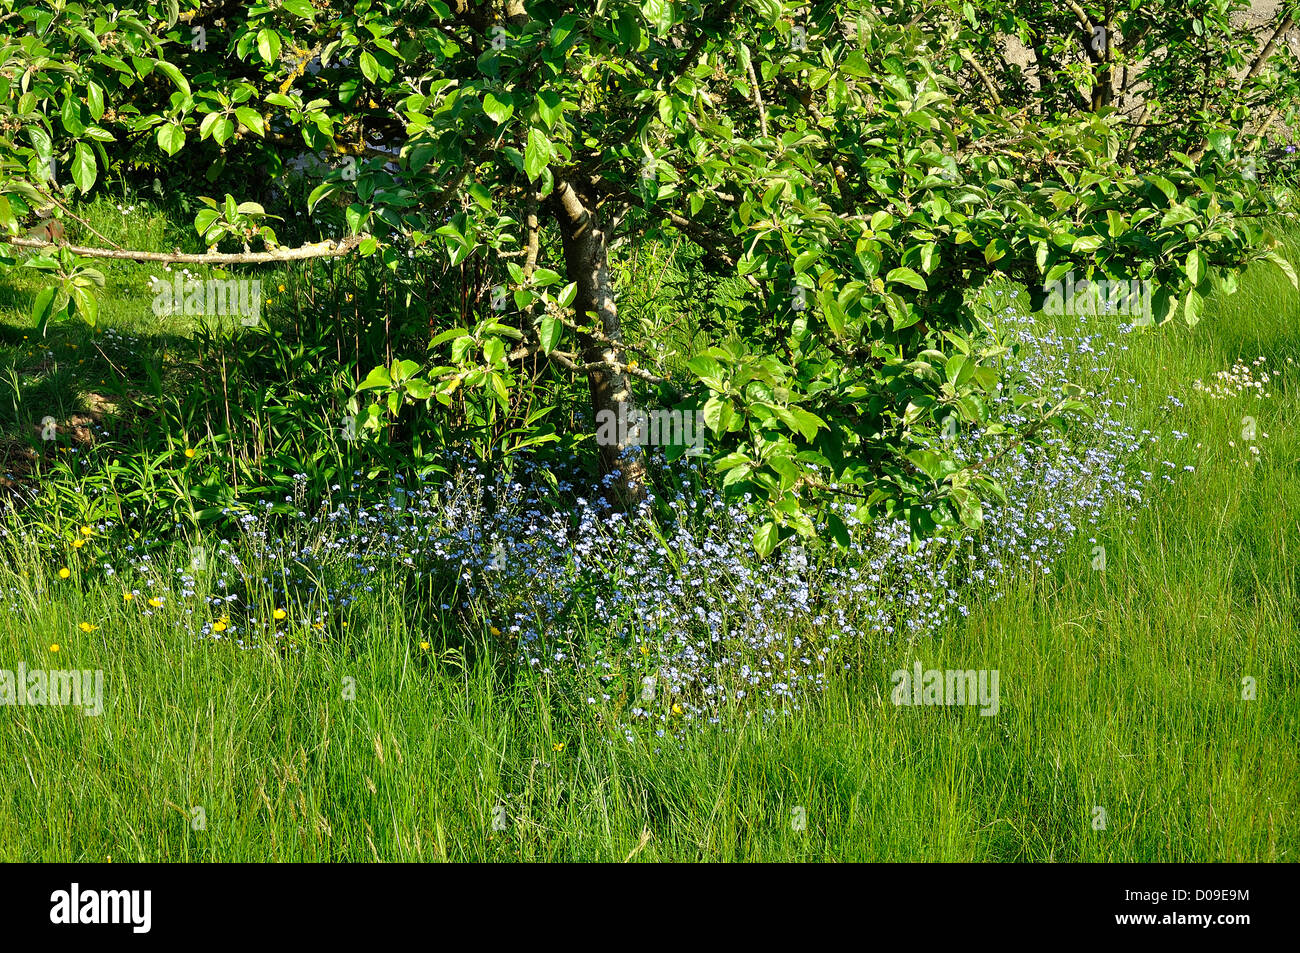 Russet apple tree (Malus domestica) on the garden with myosotis in bloom at the foot of the tree, in may. Stock Photo